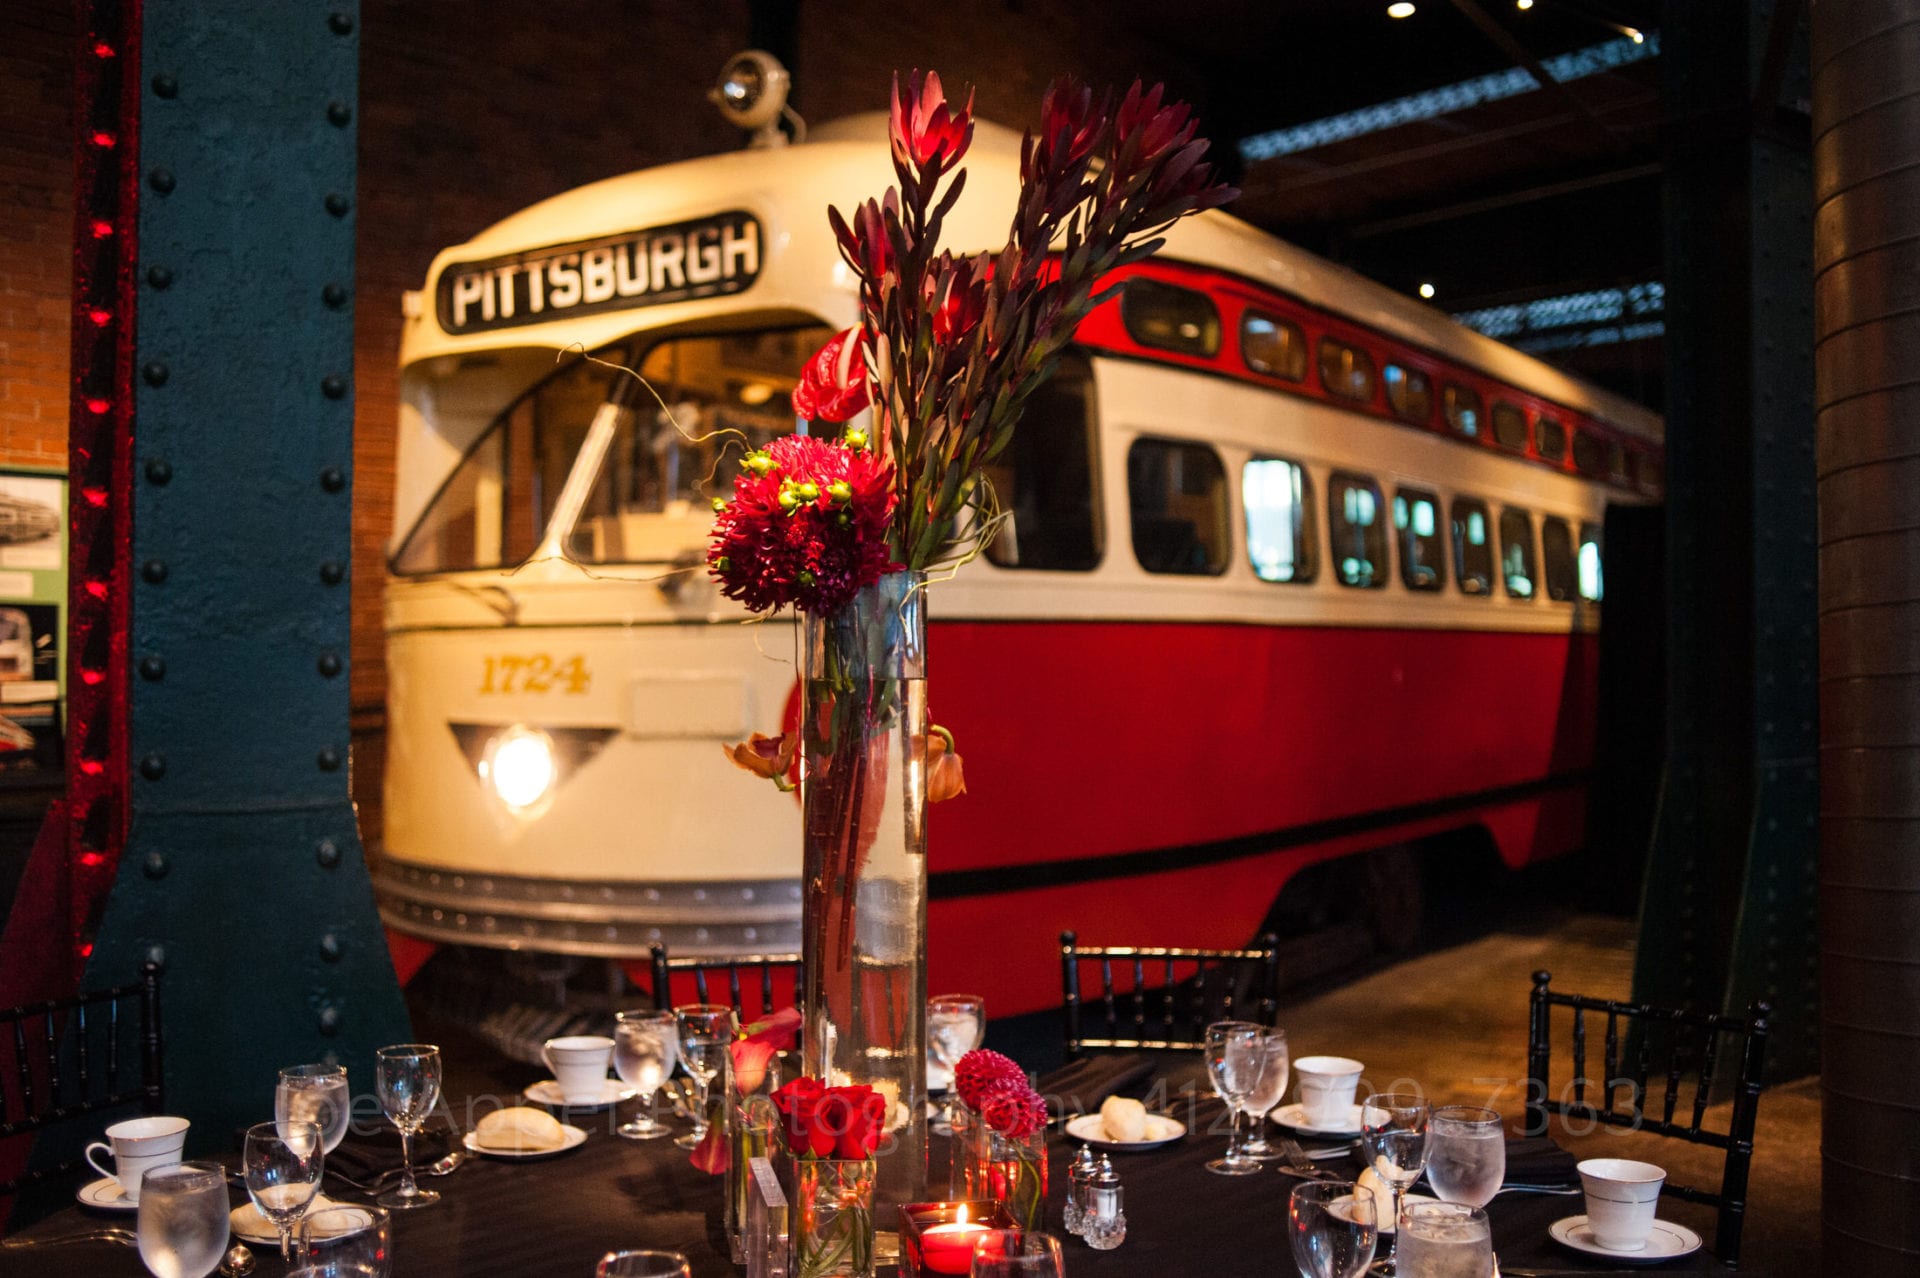 A tall glass vase containing red flowers on a table in front of a Pittsburgh trolley